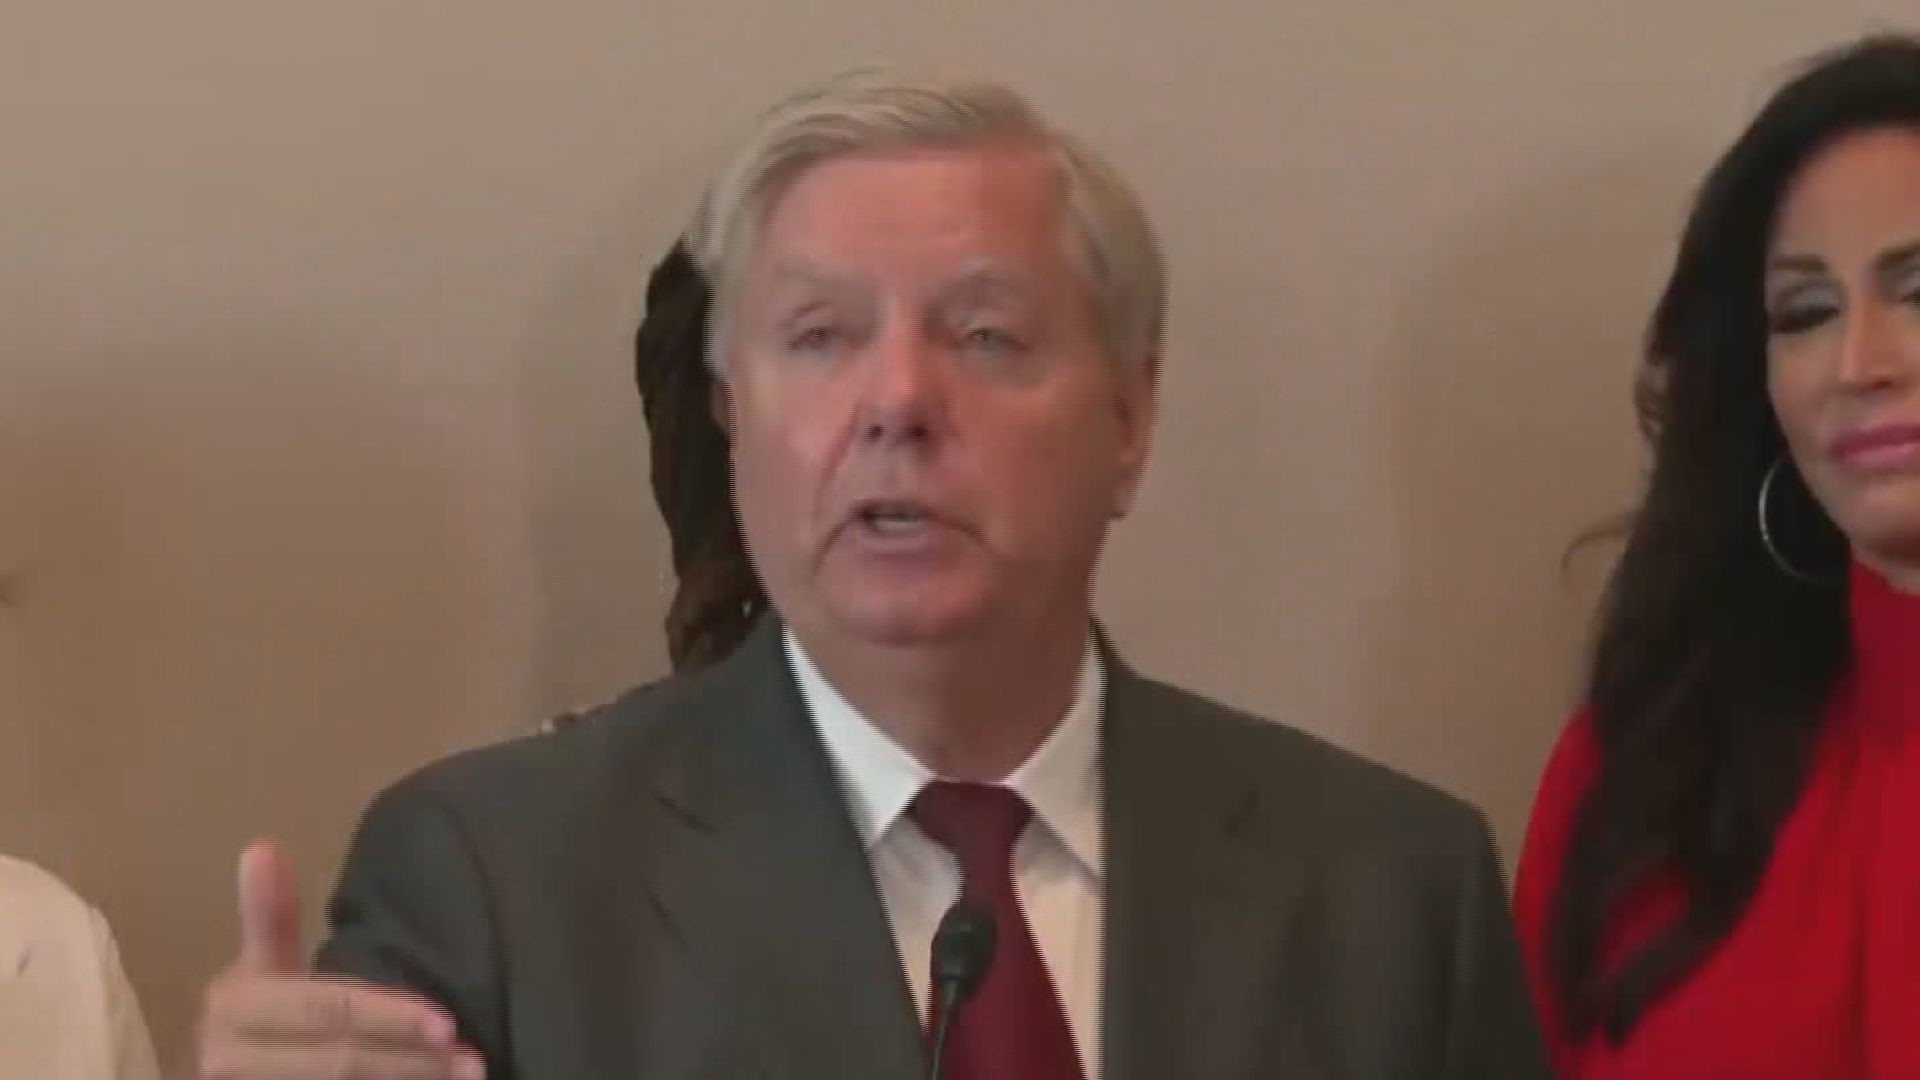 The bill is not expected to pass in the current congress, but Sen. Graham hope’s it will be an incentive to get people to vote republican.